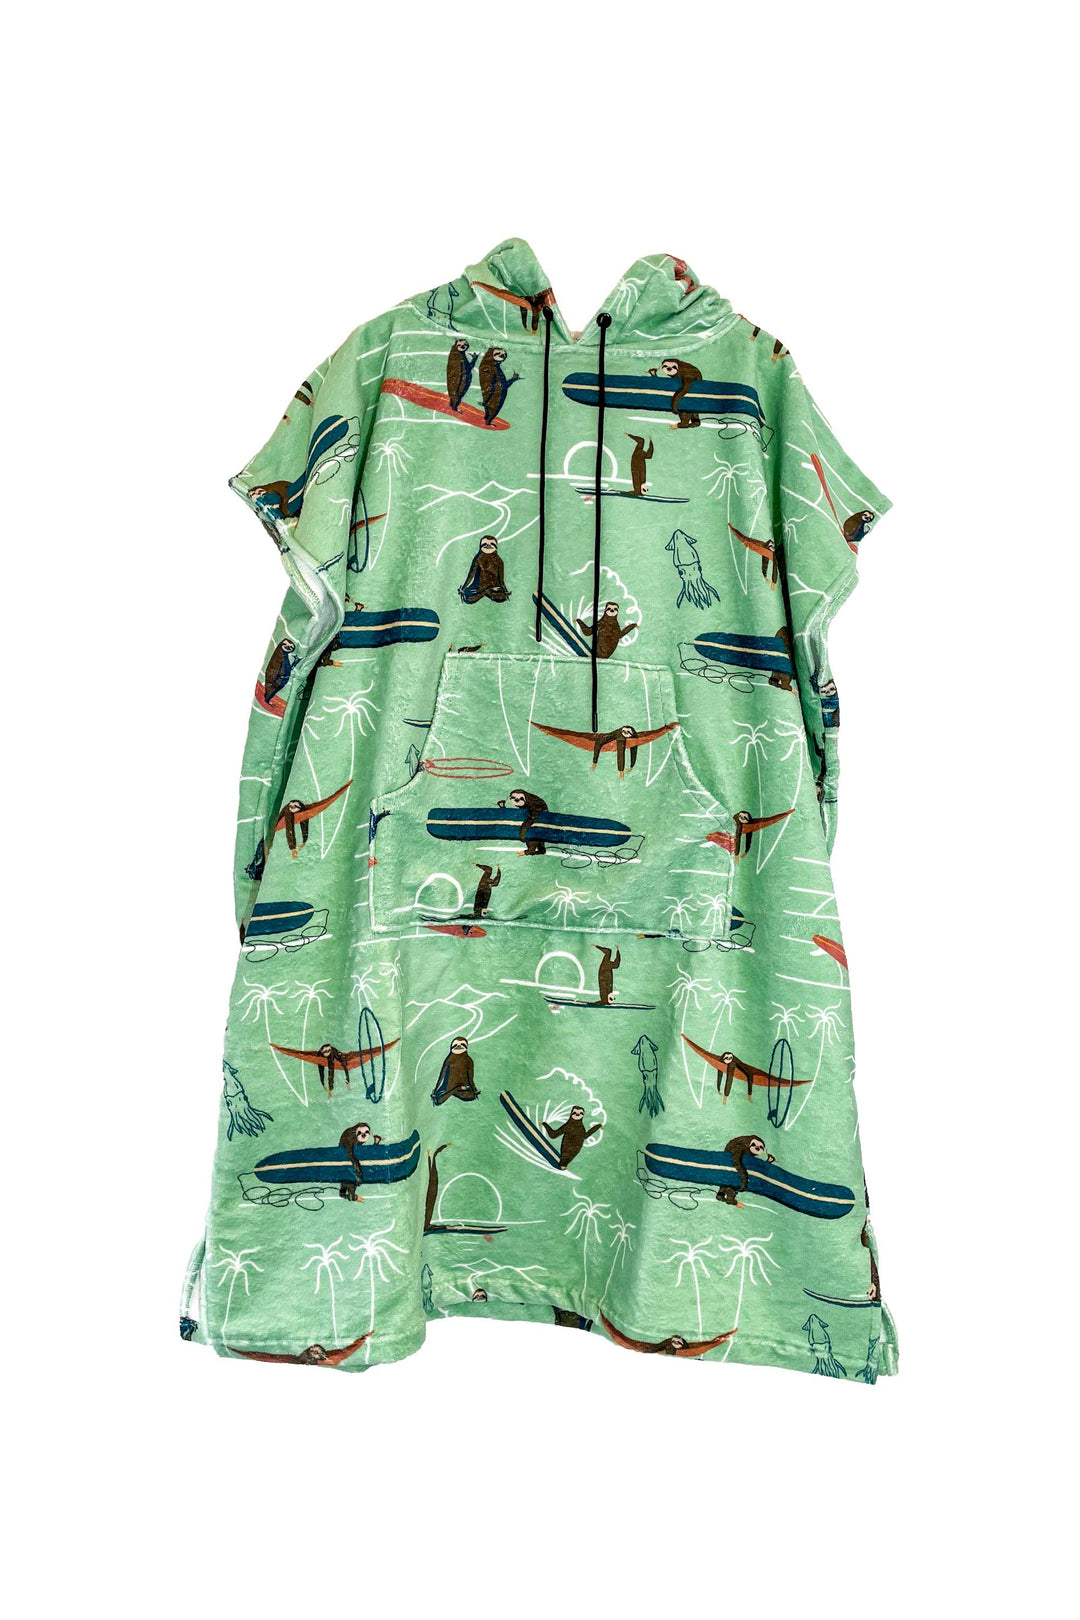 Surf poncho SURFSLOTHS adult - LIMITED EDITION